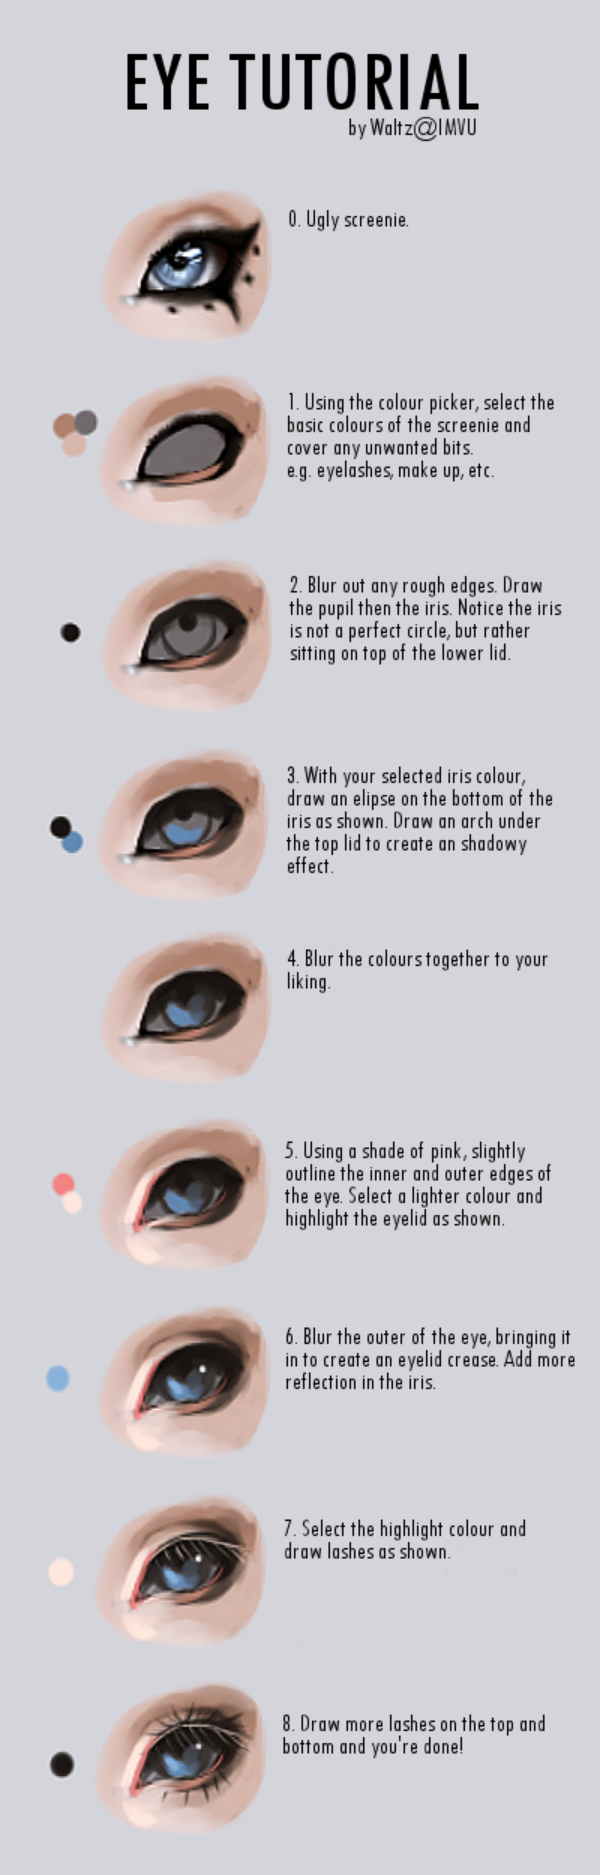 How-to-paint-an-eye-Amazing-Tutorials